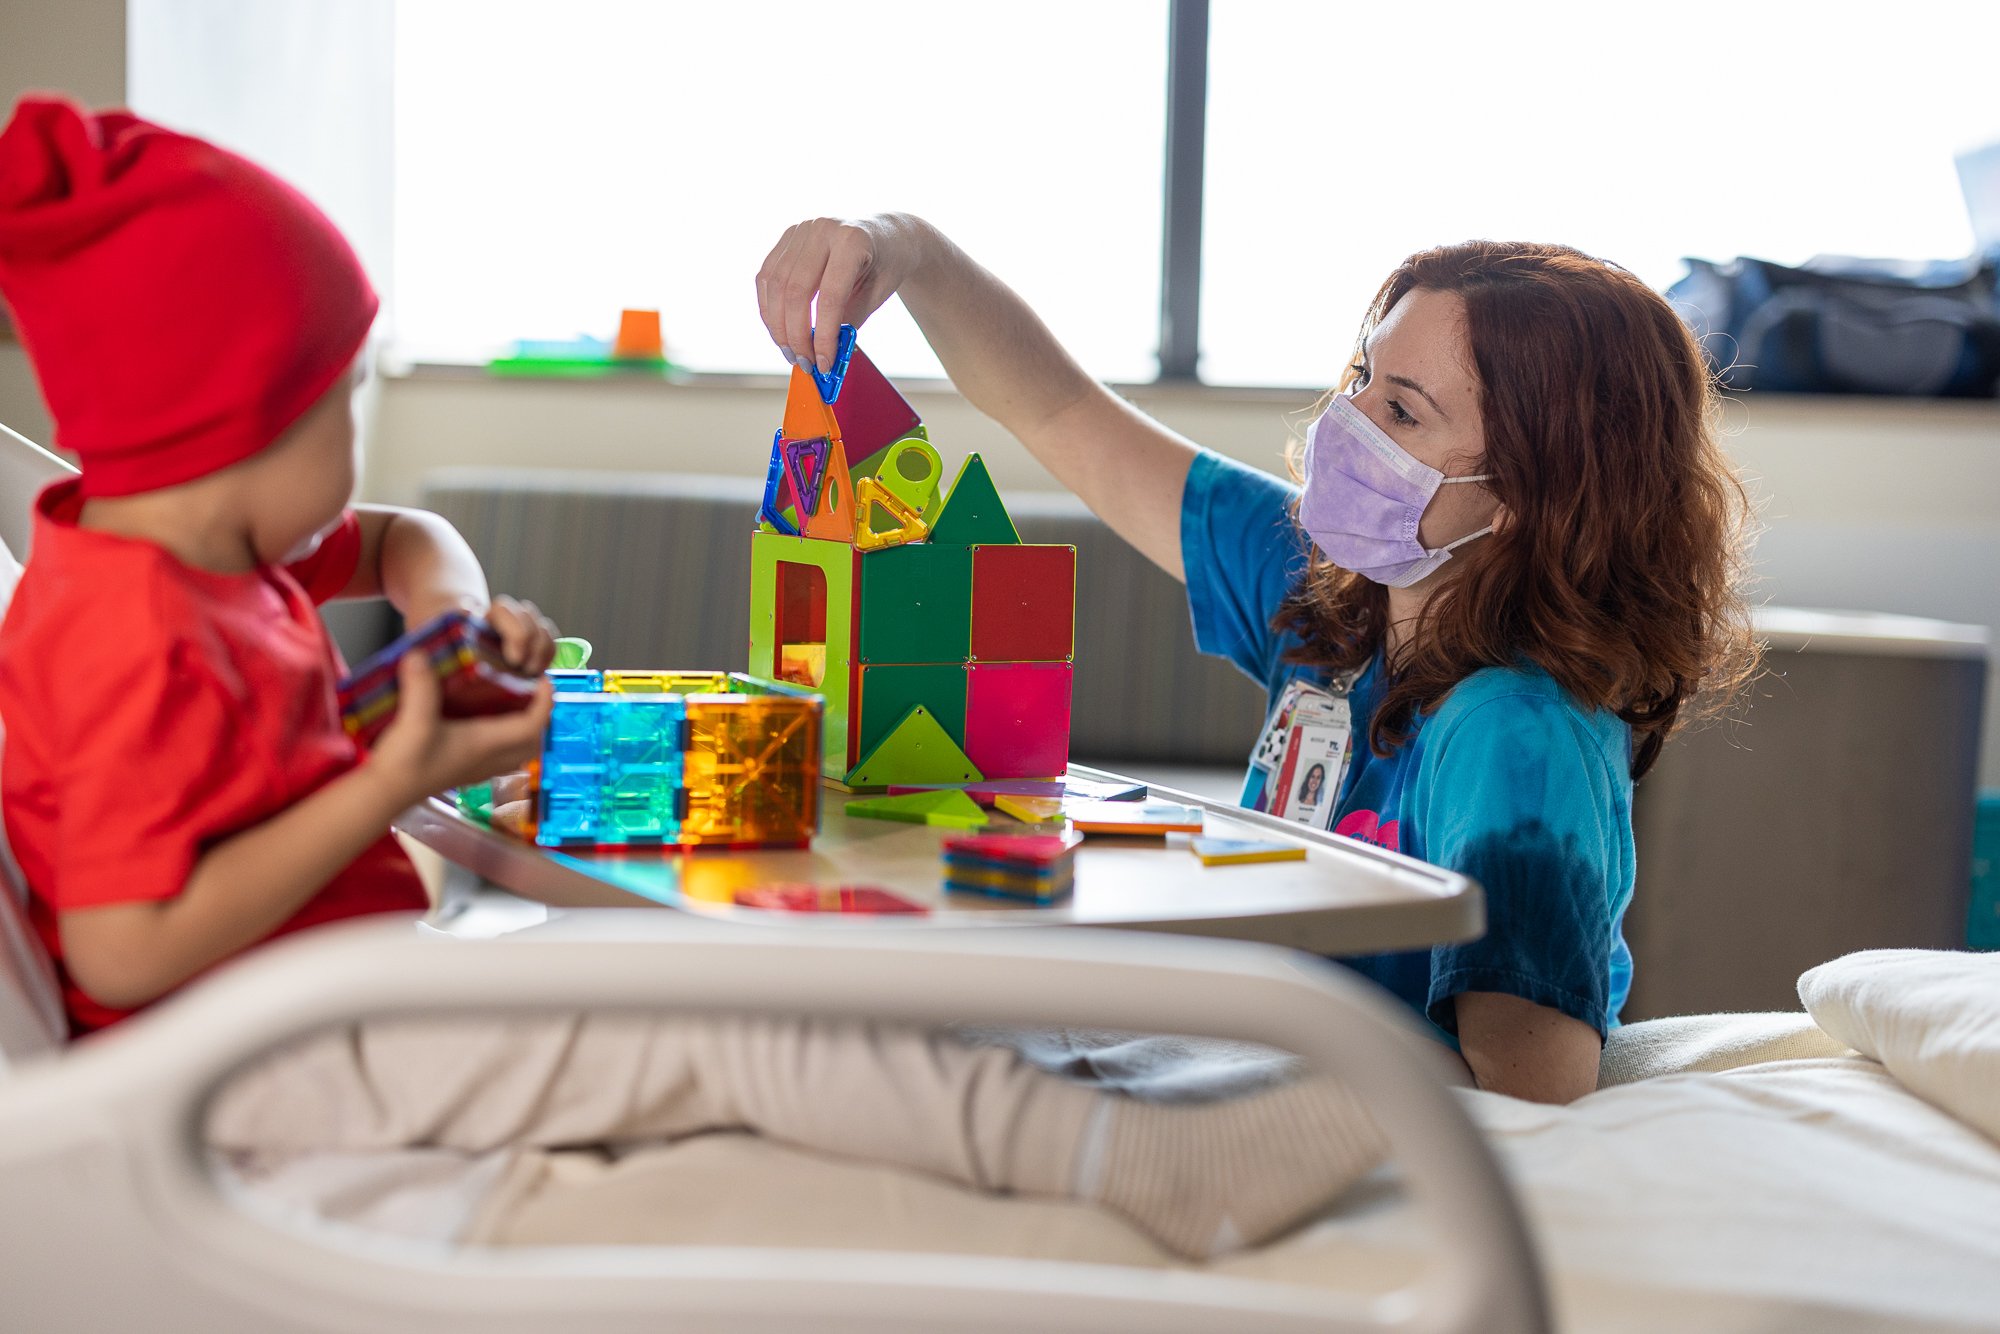 Brown-haired nurse plays with colorful magnatiles with young male patient in a red beanie